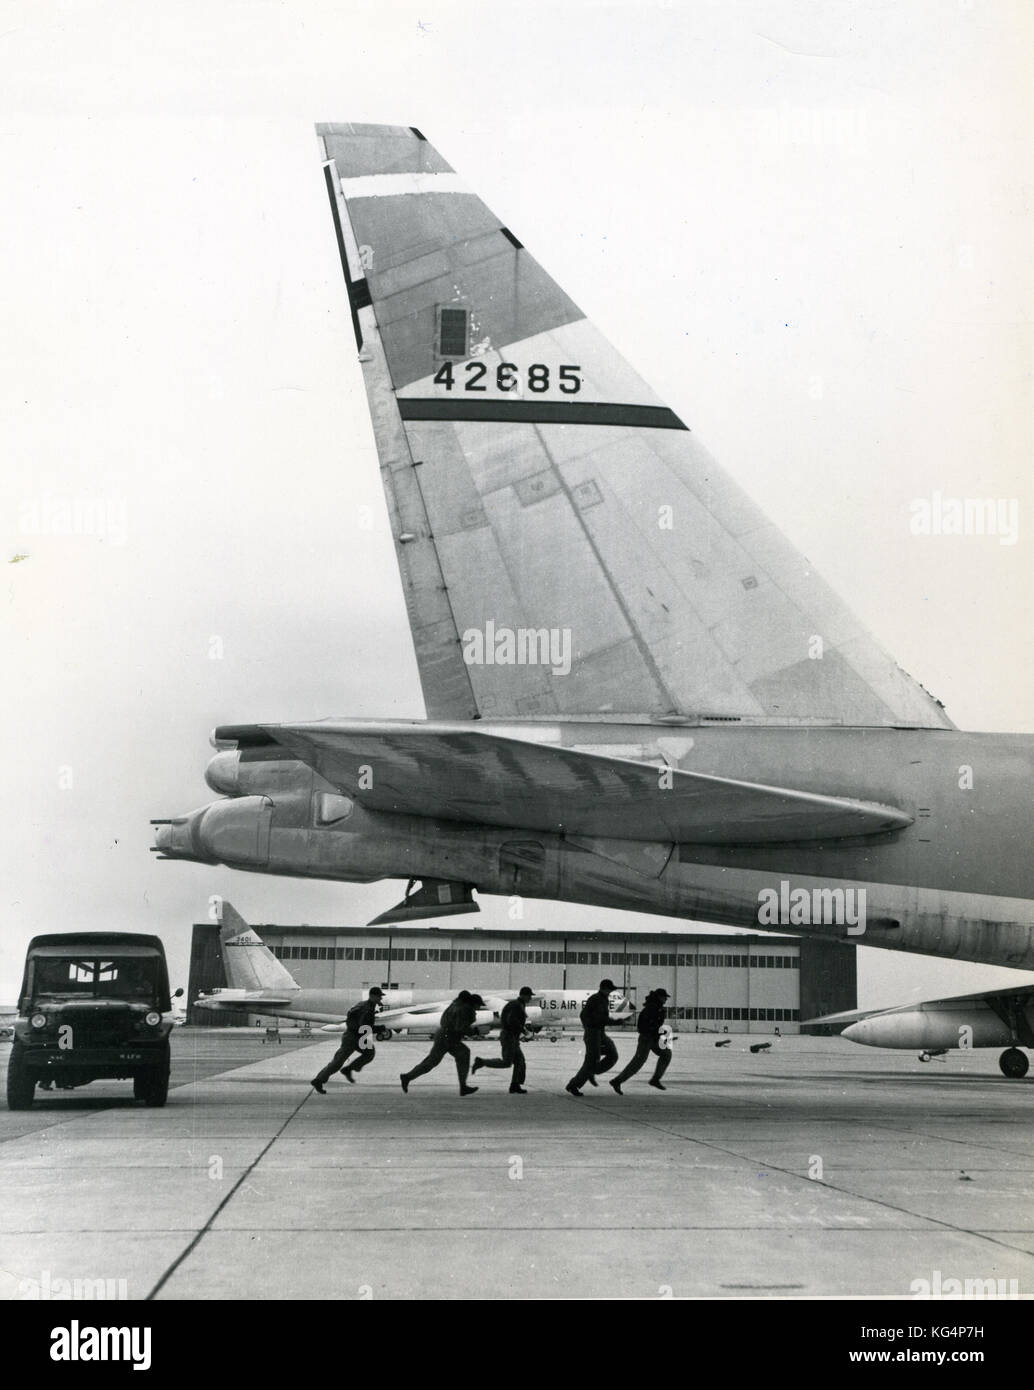 1959- Photo of US Air Force Strategic Air Command (SAC) crews running from their jeeps to board combat-ready aircraft. The SAC was established in March 1946 with a primary mission of Soviet 'deterrence.' Stock Photo